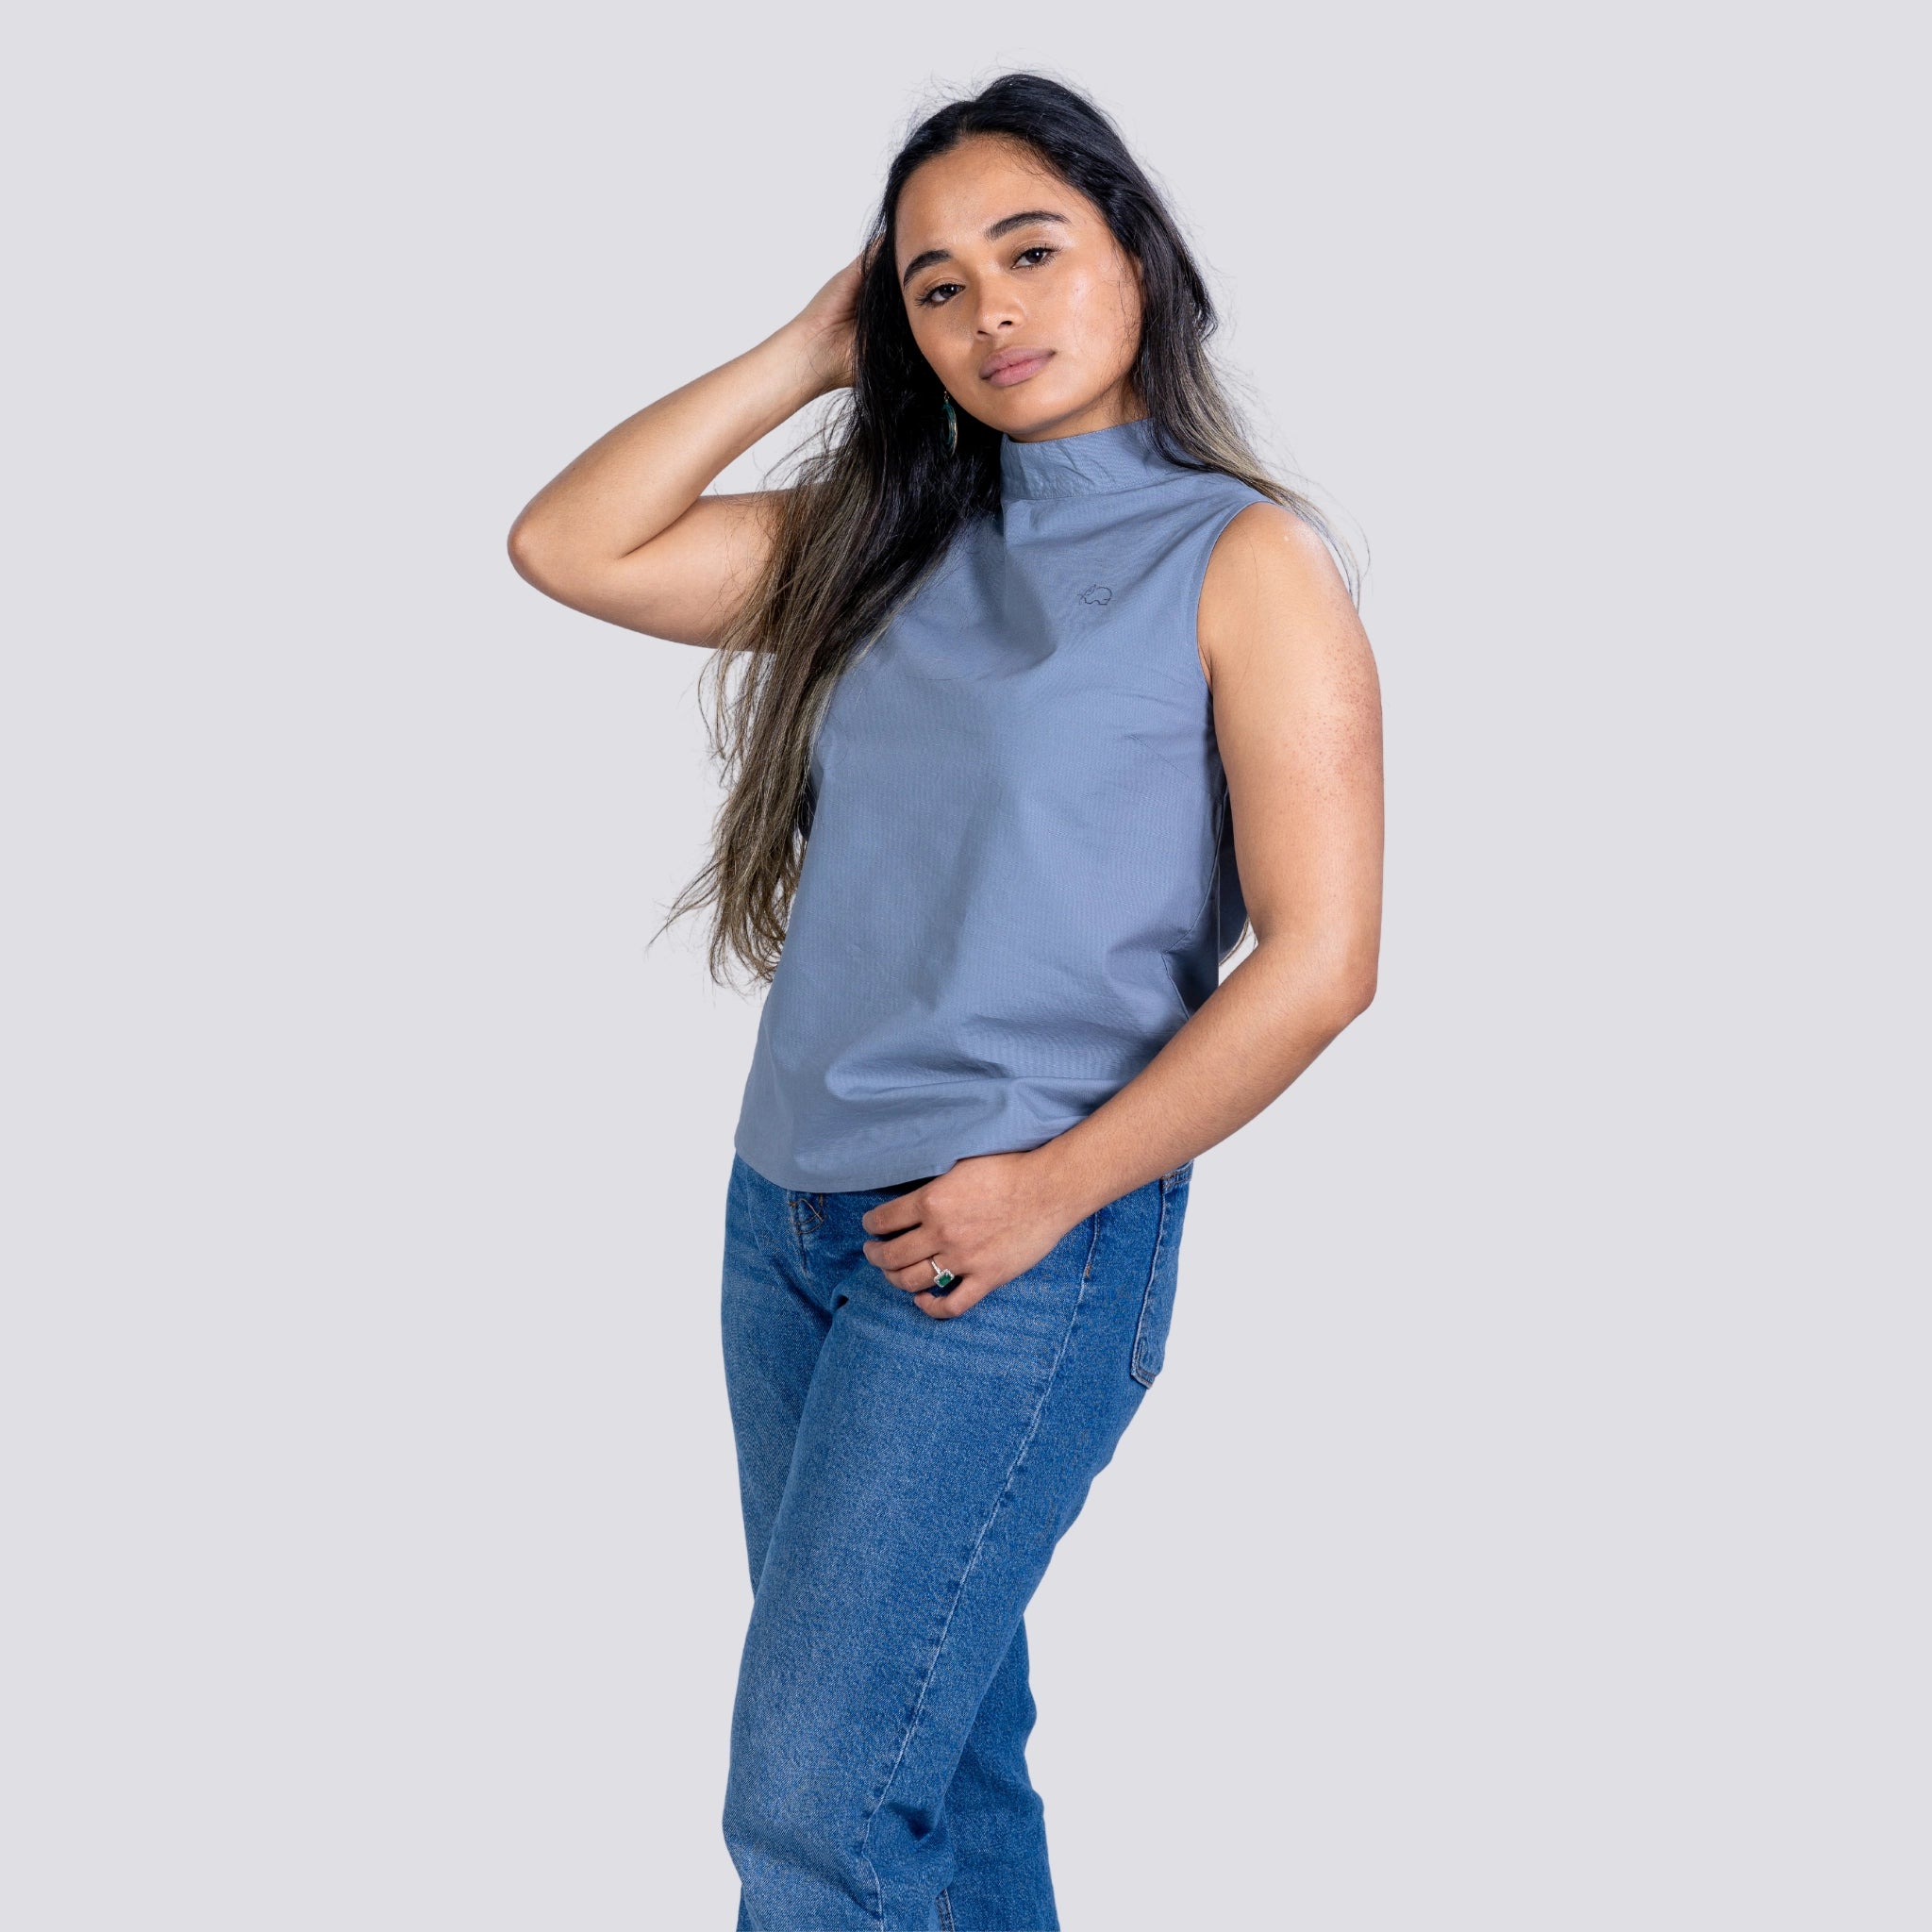 Woman in a sustainable fashion Karee Linen Sleeveless Top in Classic Grey and blue jeans posing with her hand in her hair, against a light gray background.